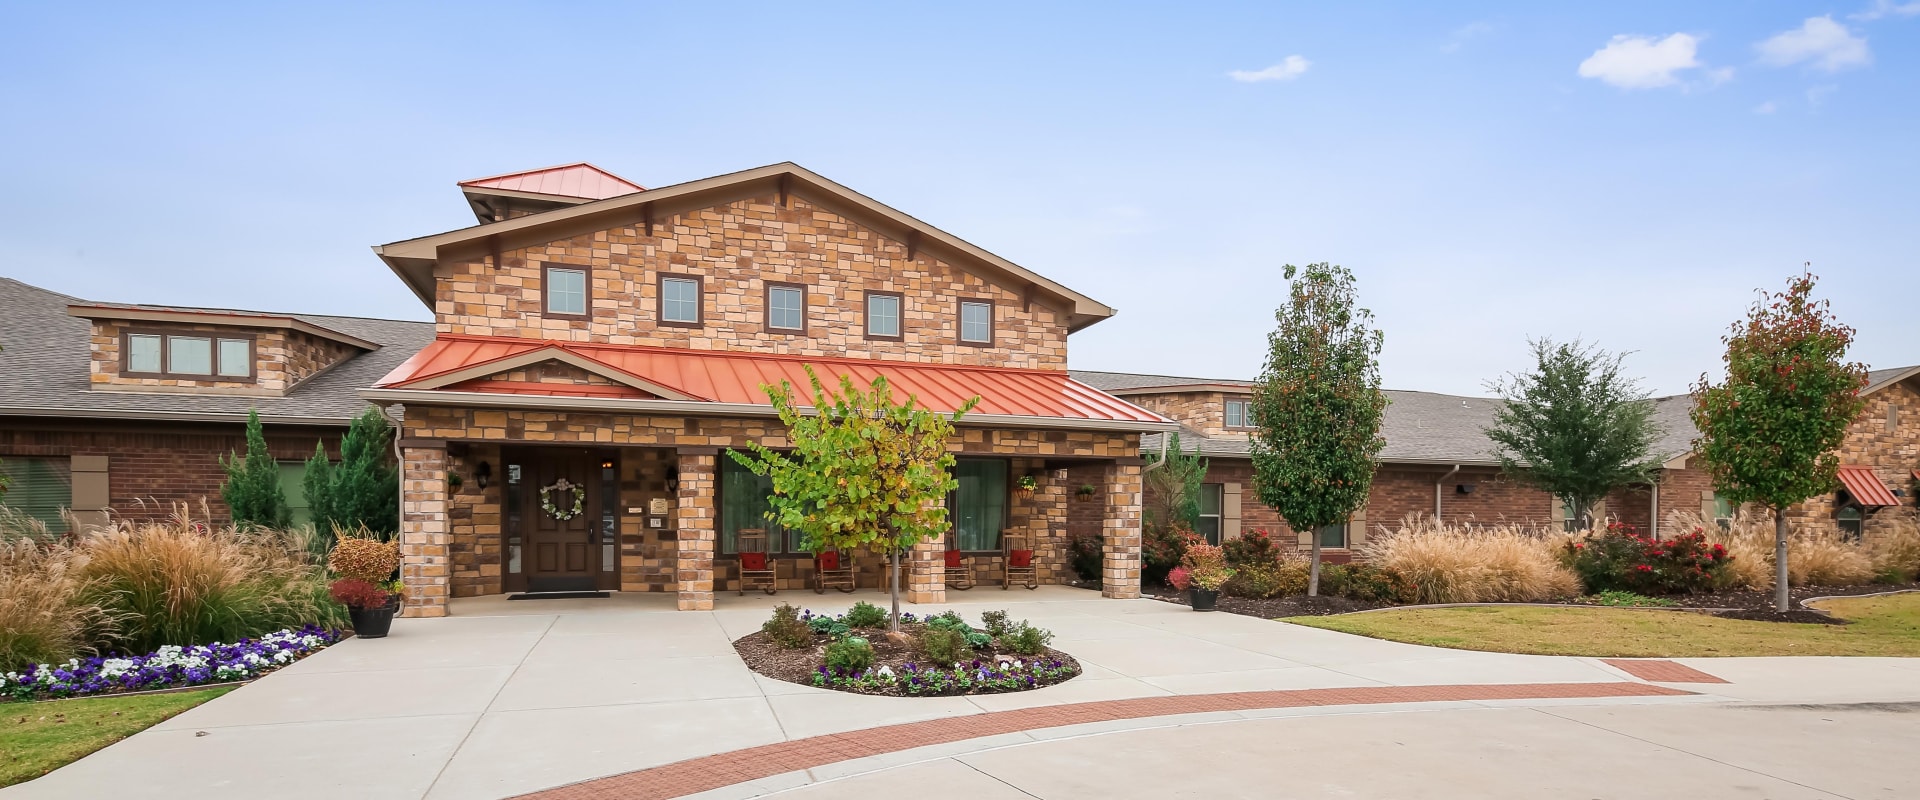 The Advantages of Assisted Living in Central Texas